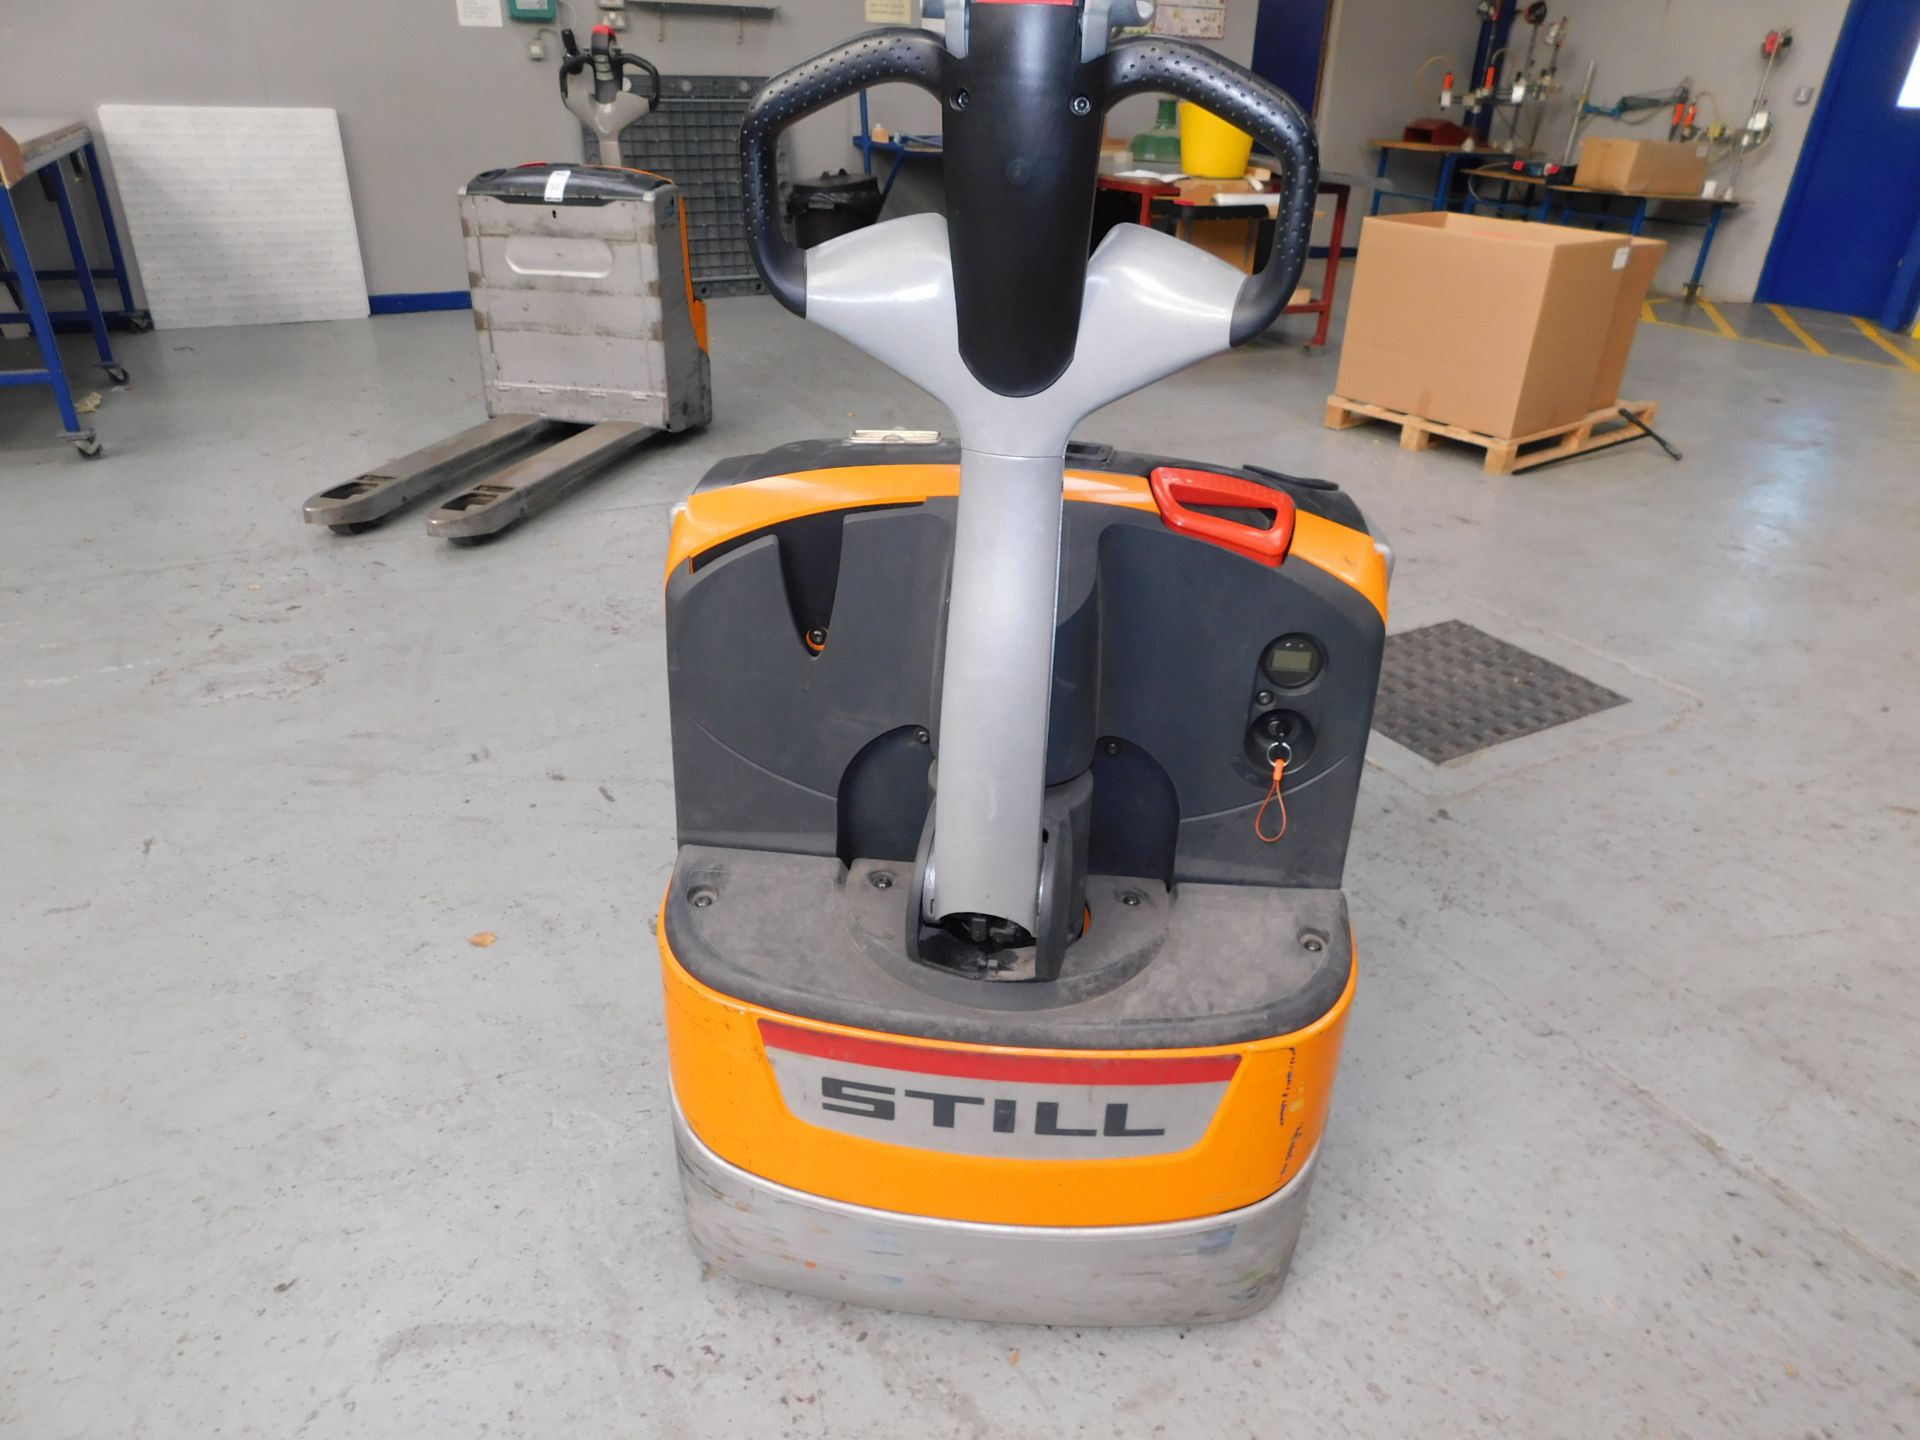 2012 Still EXU16, Long Reach Pedestrian Operated Electric Pallet Truck, Serial No W40153C01544, - Image 4 of 6